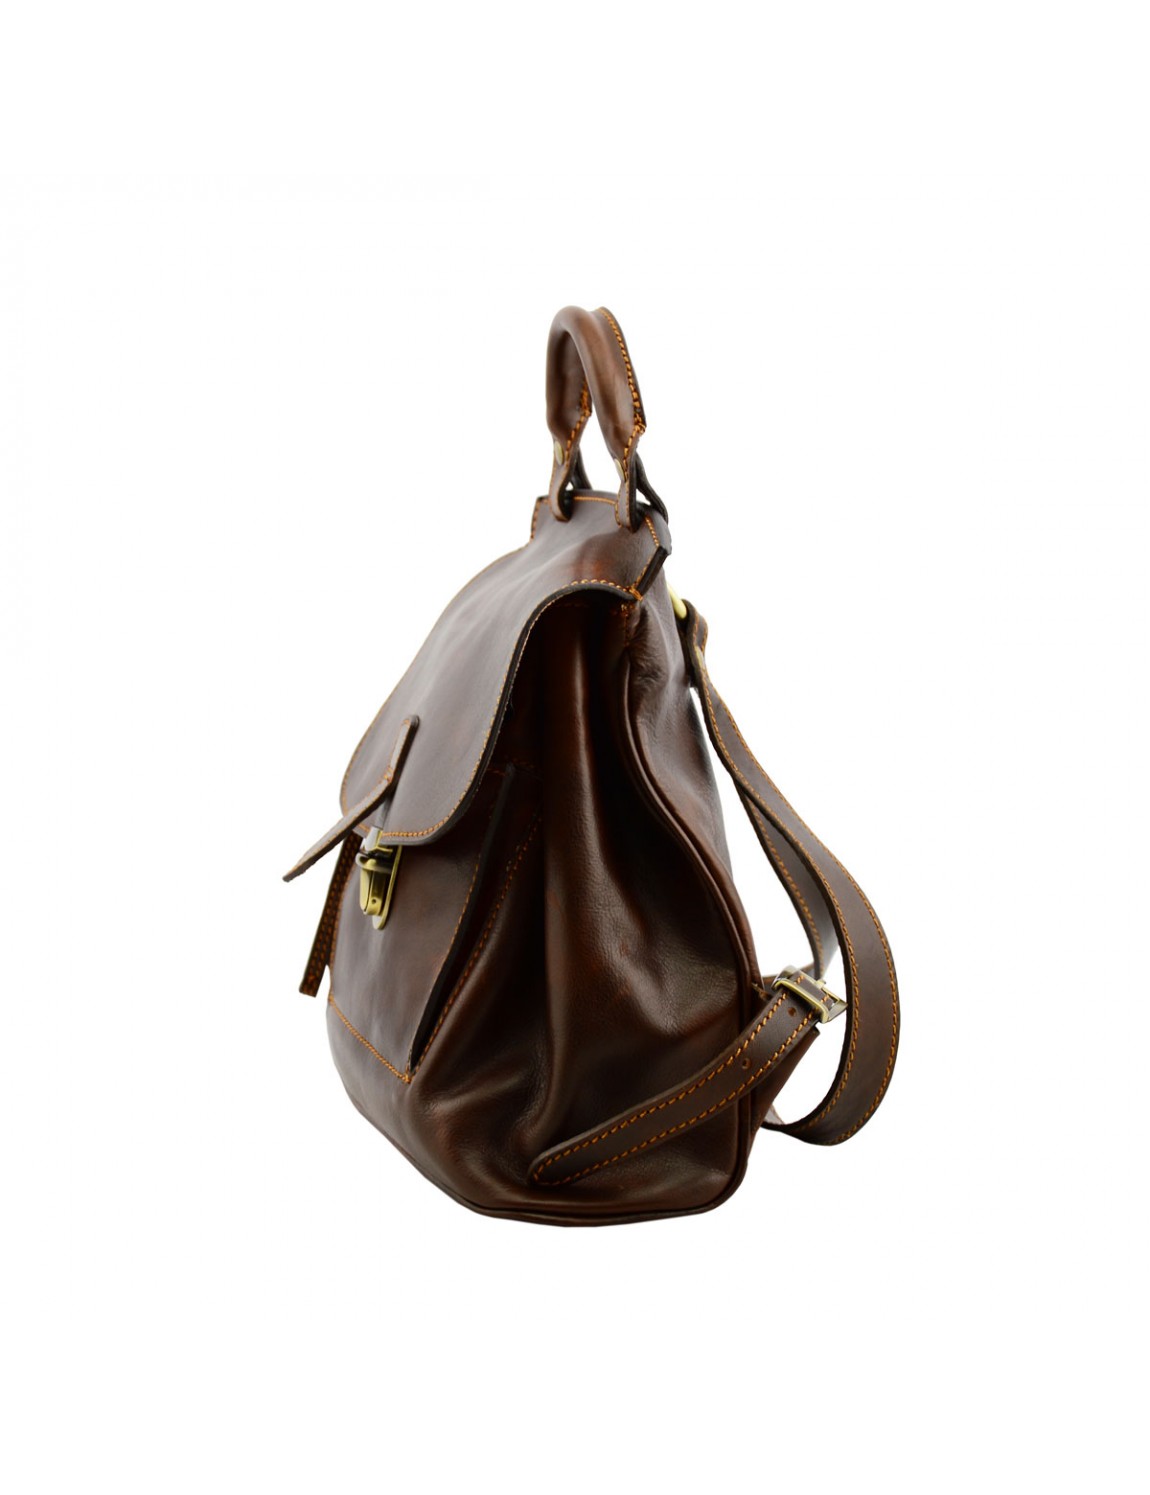 Small women’s leather backpack, much loved by women this leather backpack has a closure lap and snap in the front.